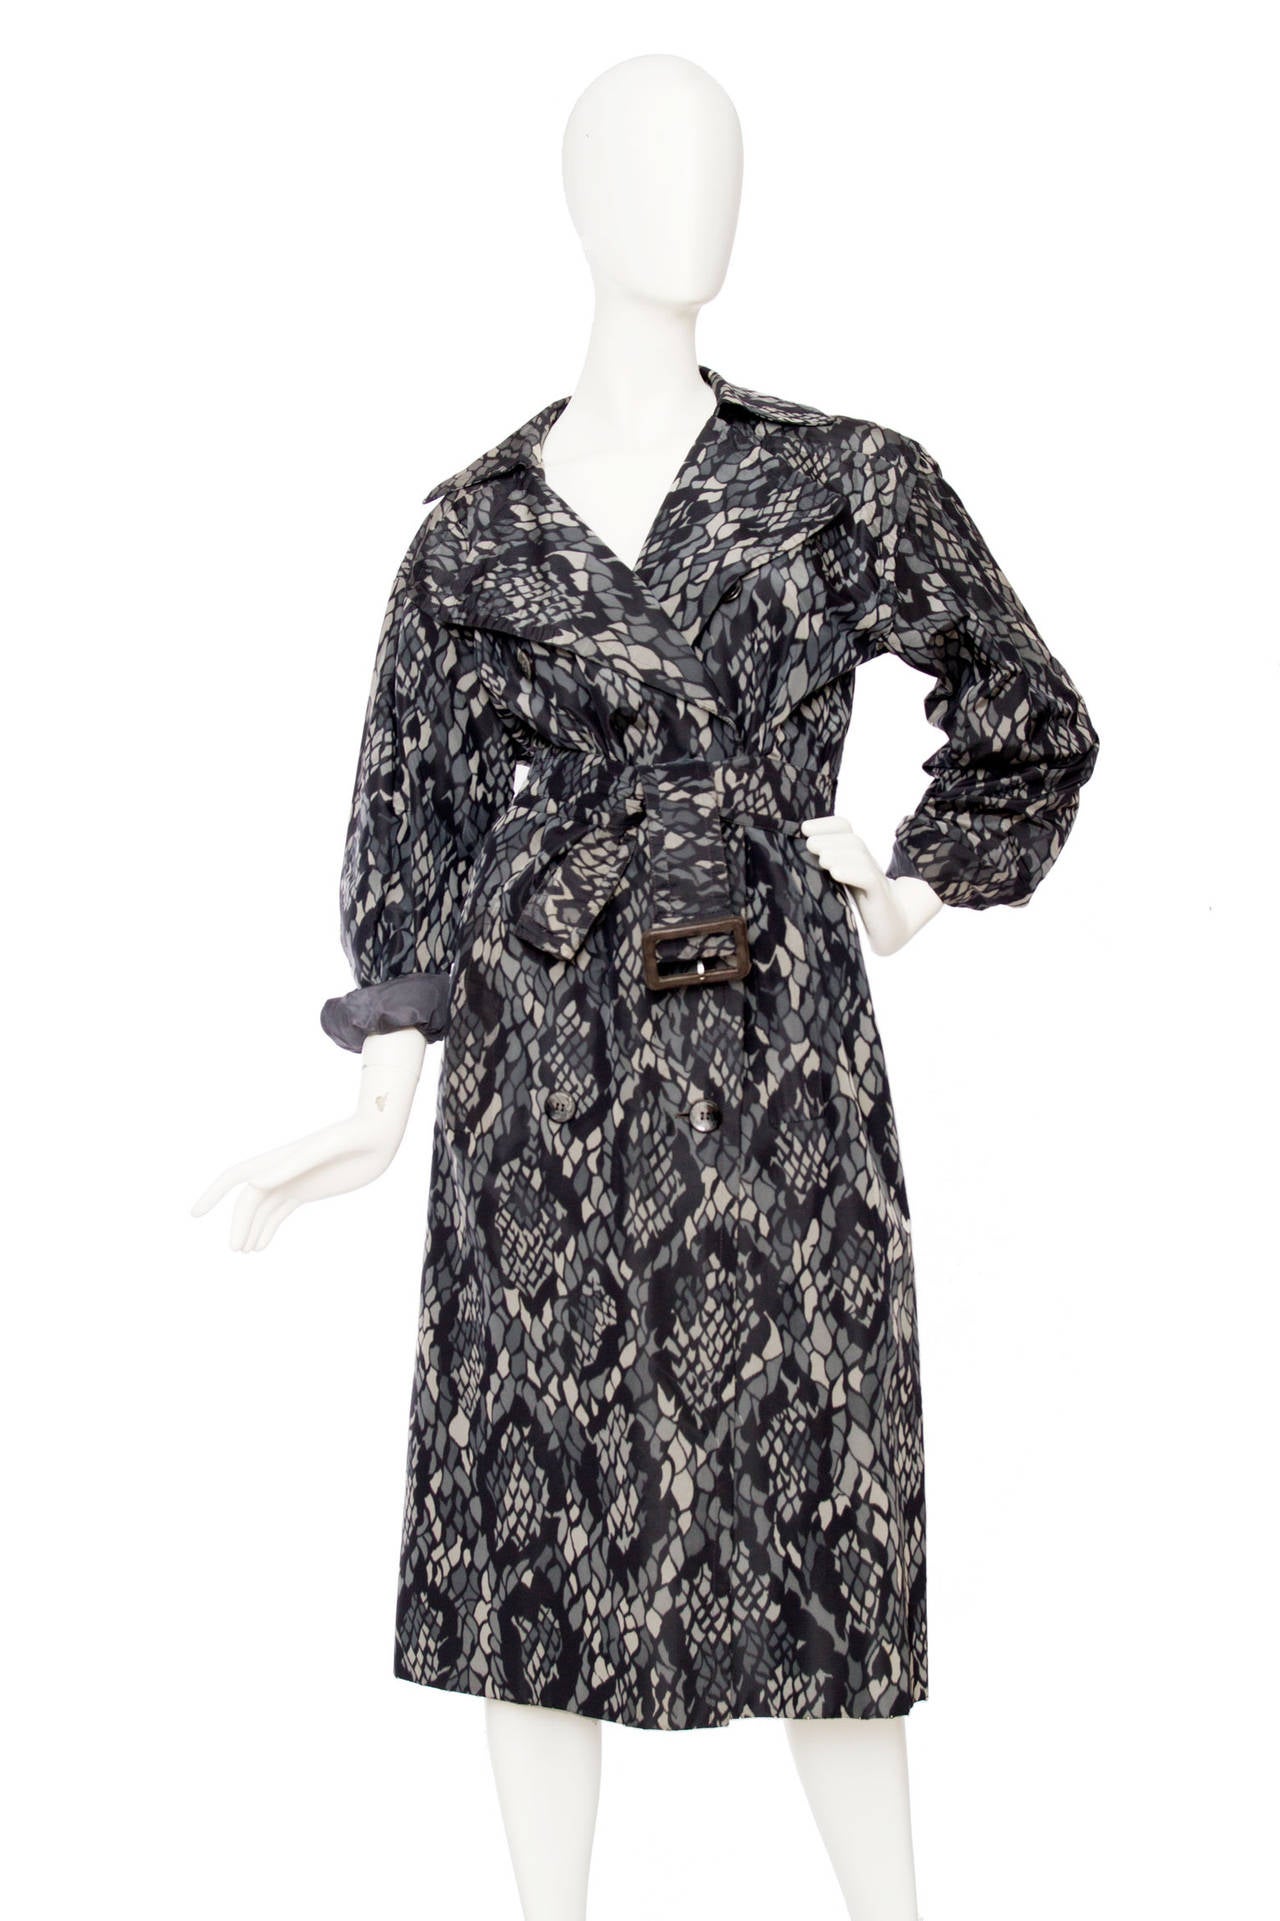 A 1980s Yves Saint Laurent couture silk trench coat with  print in grey hues. The coat has a front button closure, one buttoned cuffs and a wide waist belt in matching fabric and two front pockets. 

The coat is numbered: 59124

The size of the